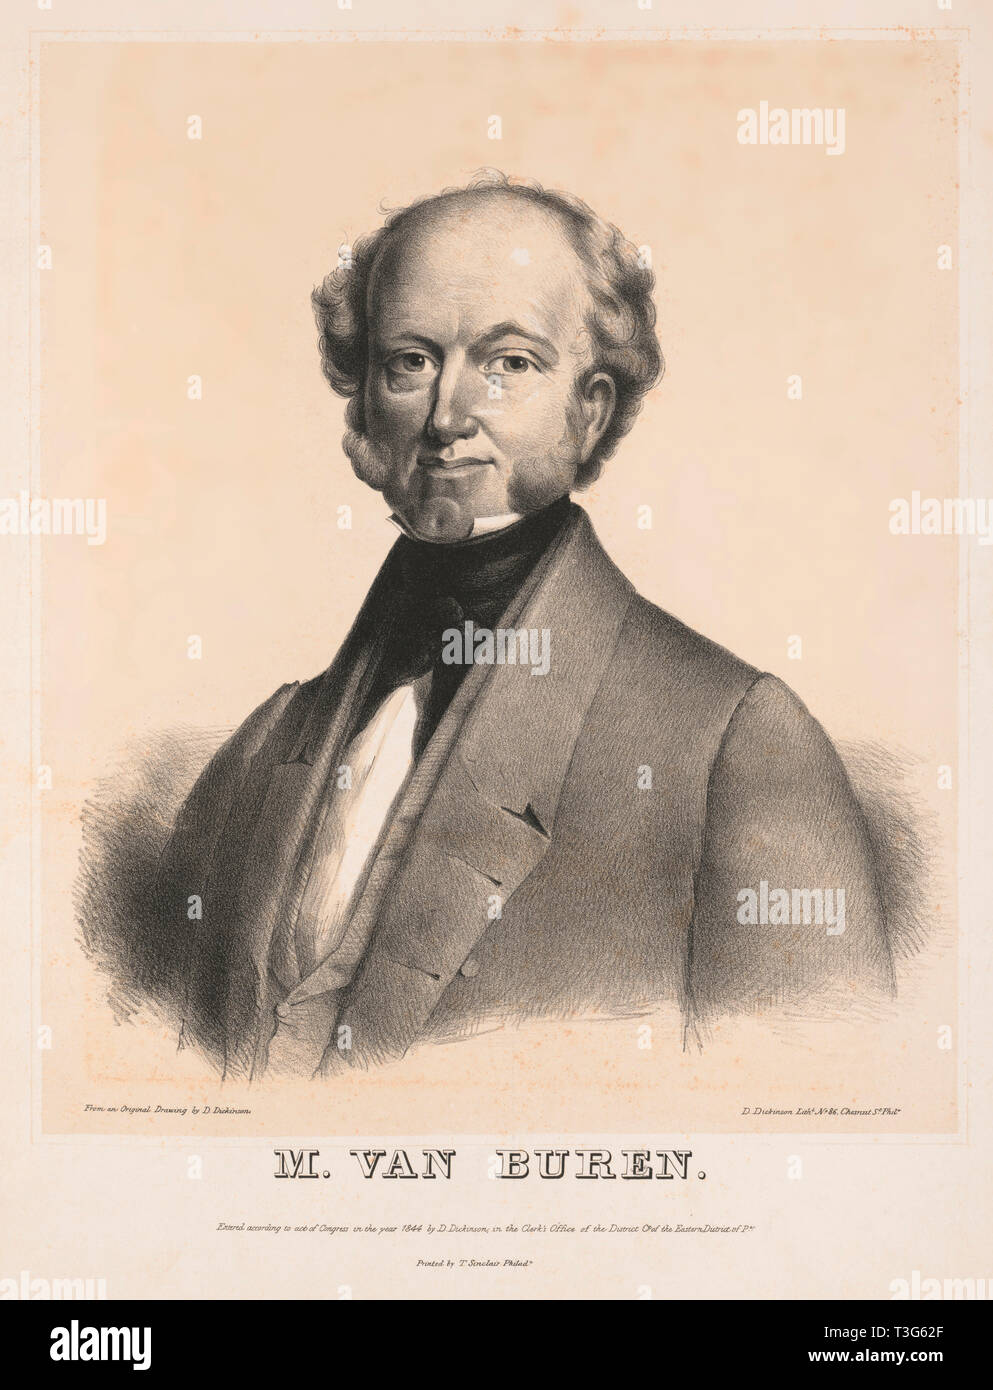 Martin Van Buren, Portrait, Lithograph from an Original Drawing by D. Dickinson, Printed by T. Sinclair, Philadelphia, 1844 Stock Photo